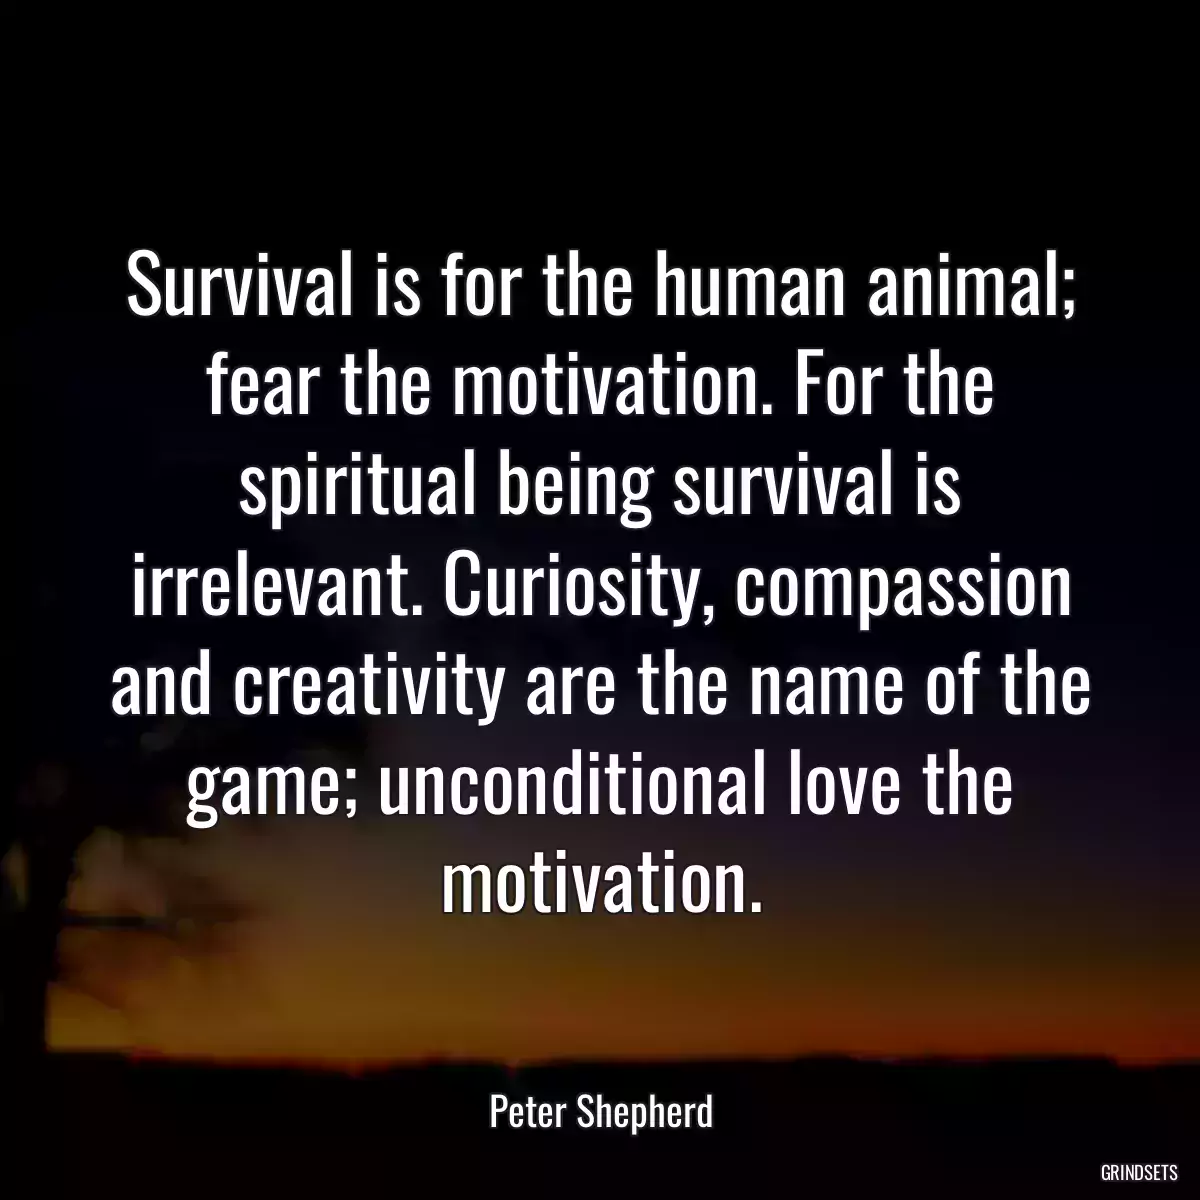 Survival is for the human animal; fear the motivation. For the spiritual being survival is irrelevant. Curiosity, compassion and creativity are the name of the game; unconditional love the motivation.